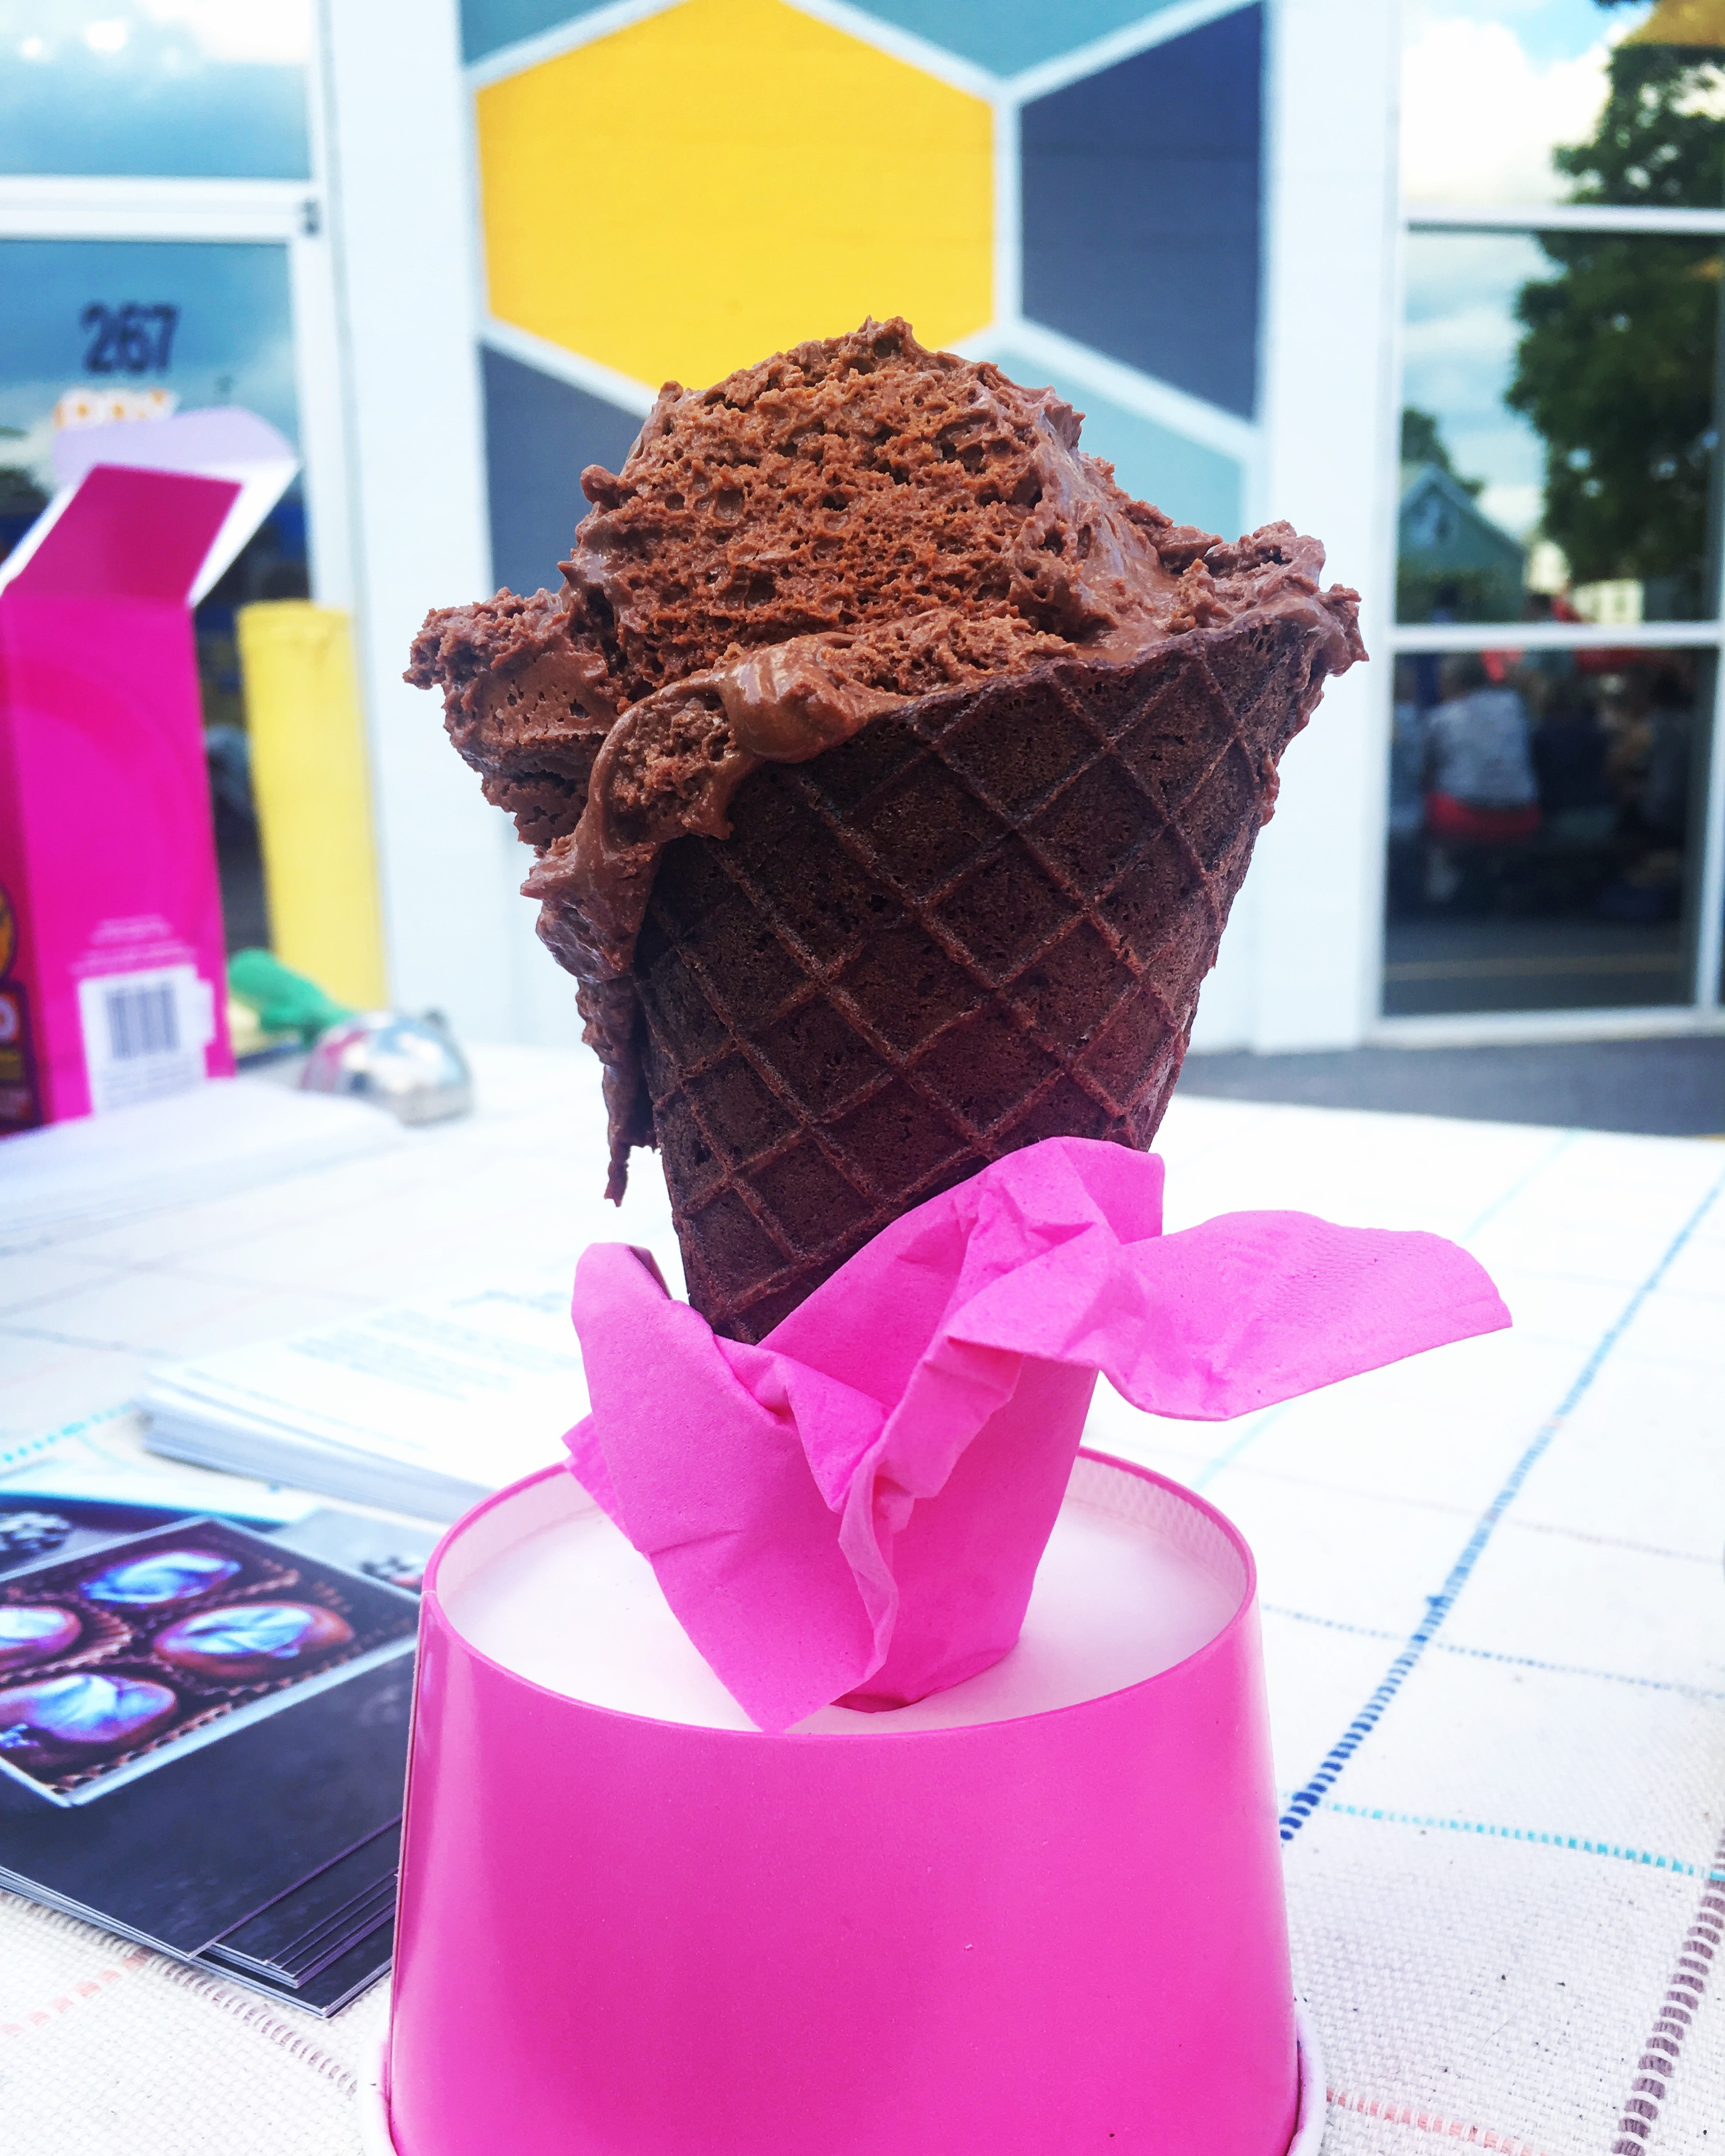 Gate Comme Des Filles chocolate mousse in a chocolate cone